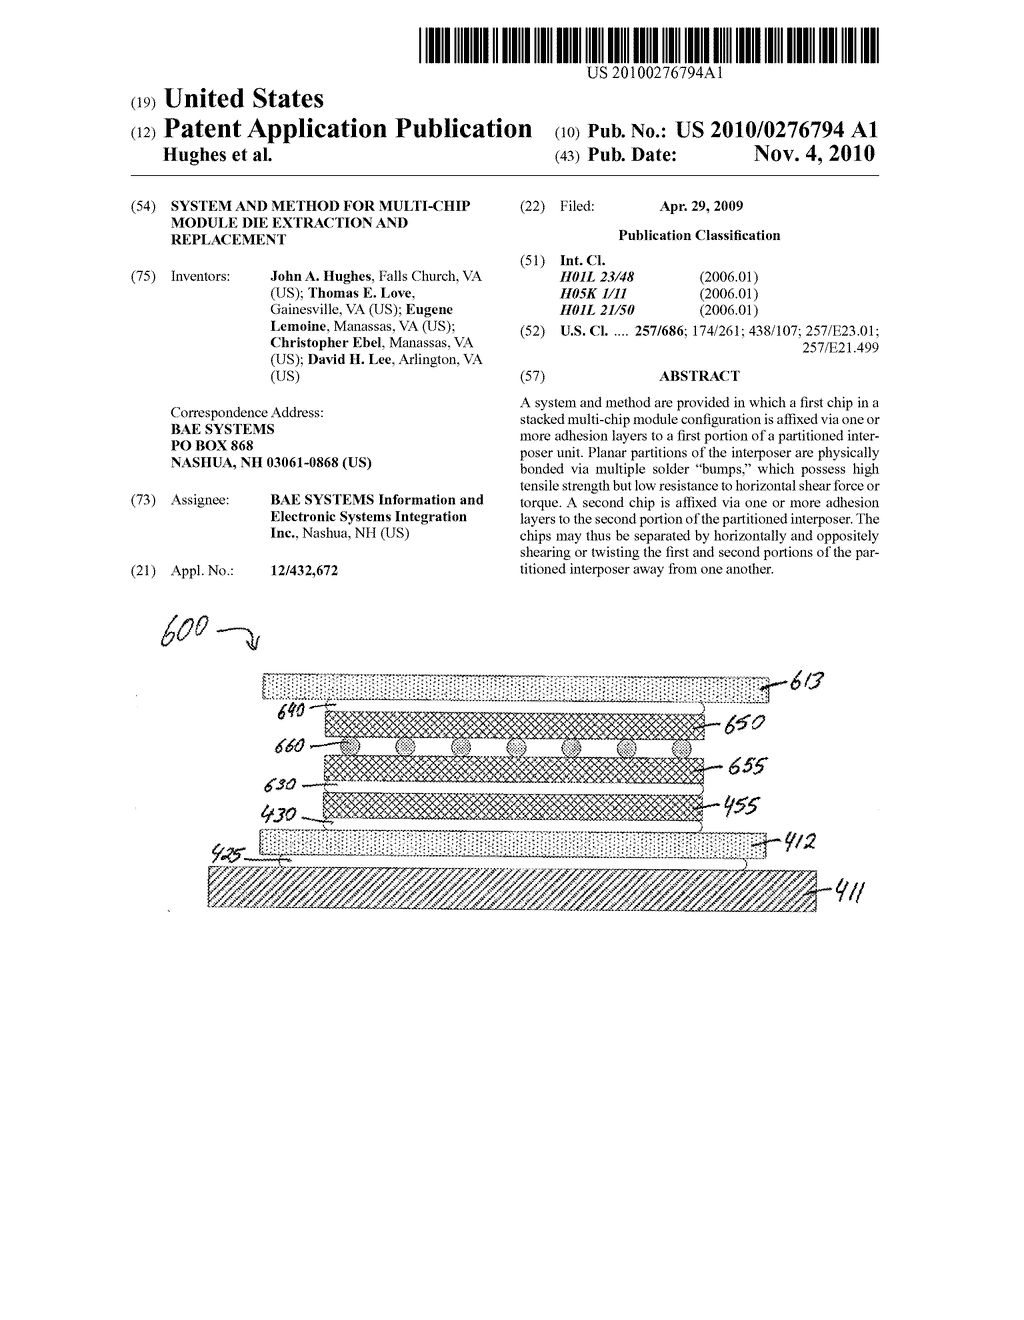 SYSTEM AND METHOD FOR MULTI-CHIP MODULE DIE EXTRACTION AND REPLACEMENT - diagram, schematic, and image 01